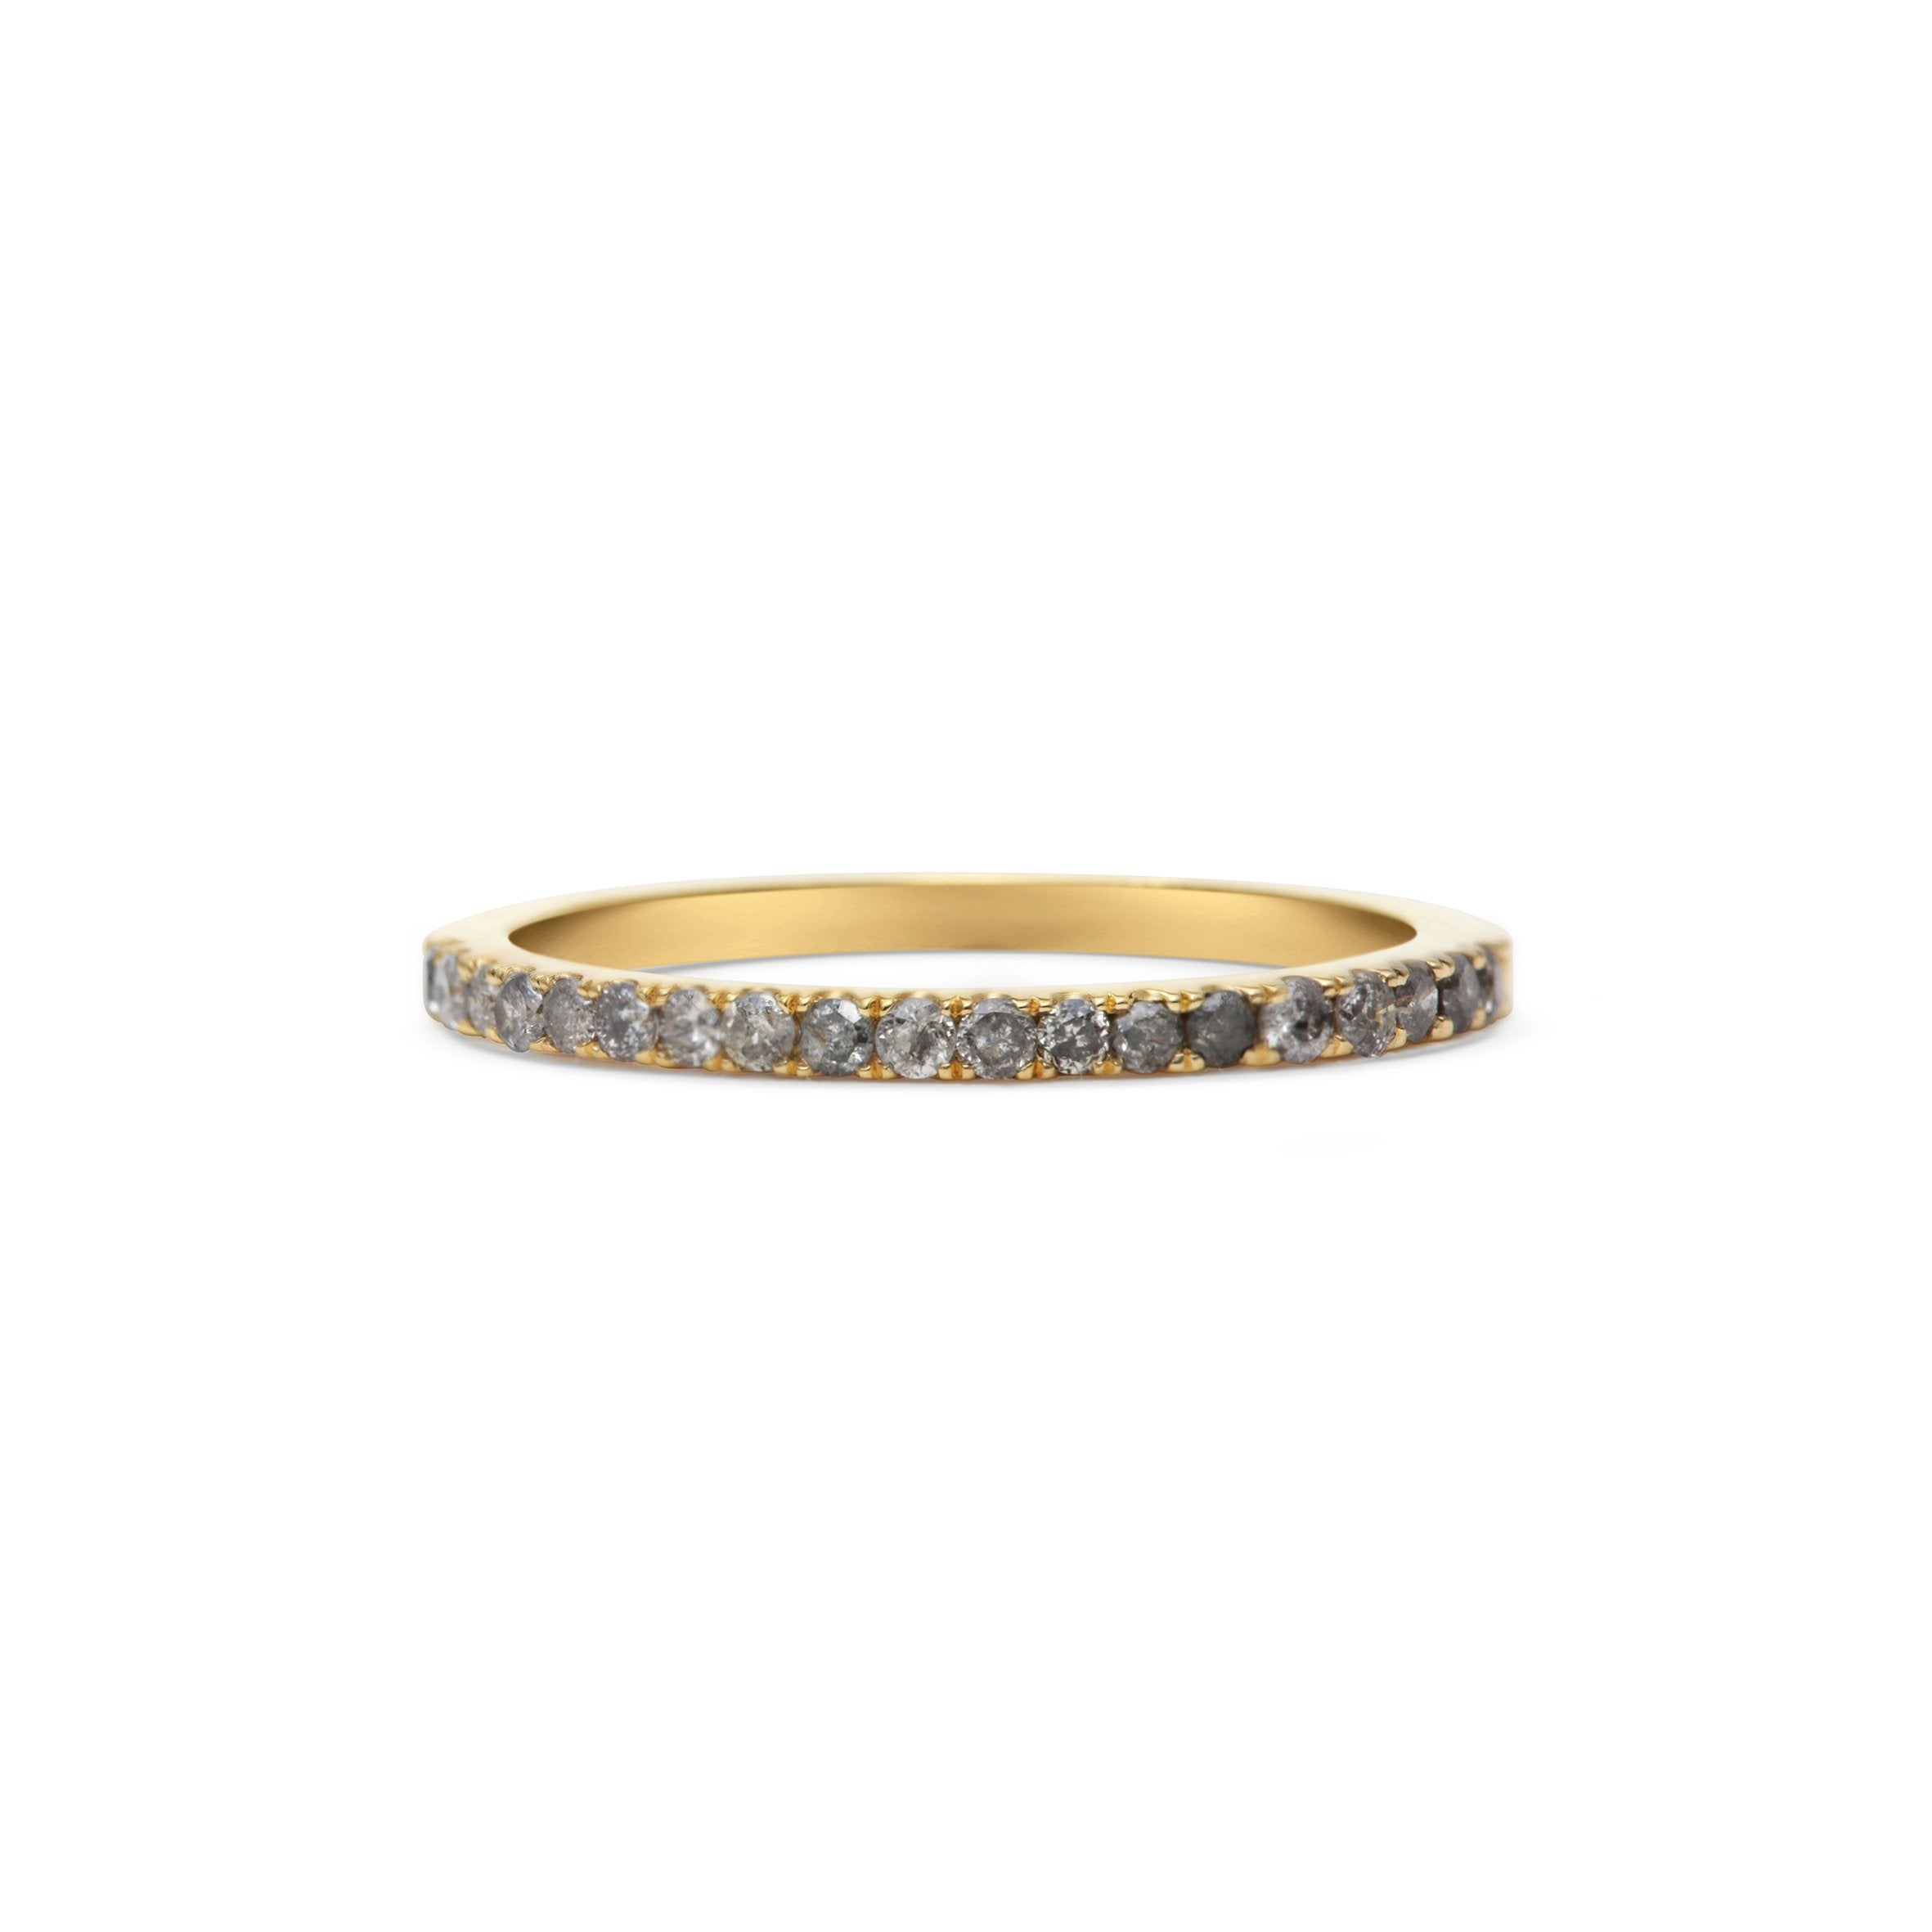 The Grey Diamond Circulum Band by East London jeweller Rachel Boston | Discover our collections of unique and timeless engagement rings, wedding rings, and modern fine jewellery.